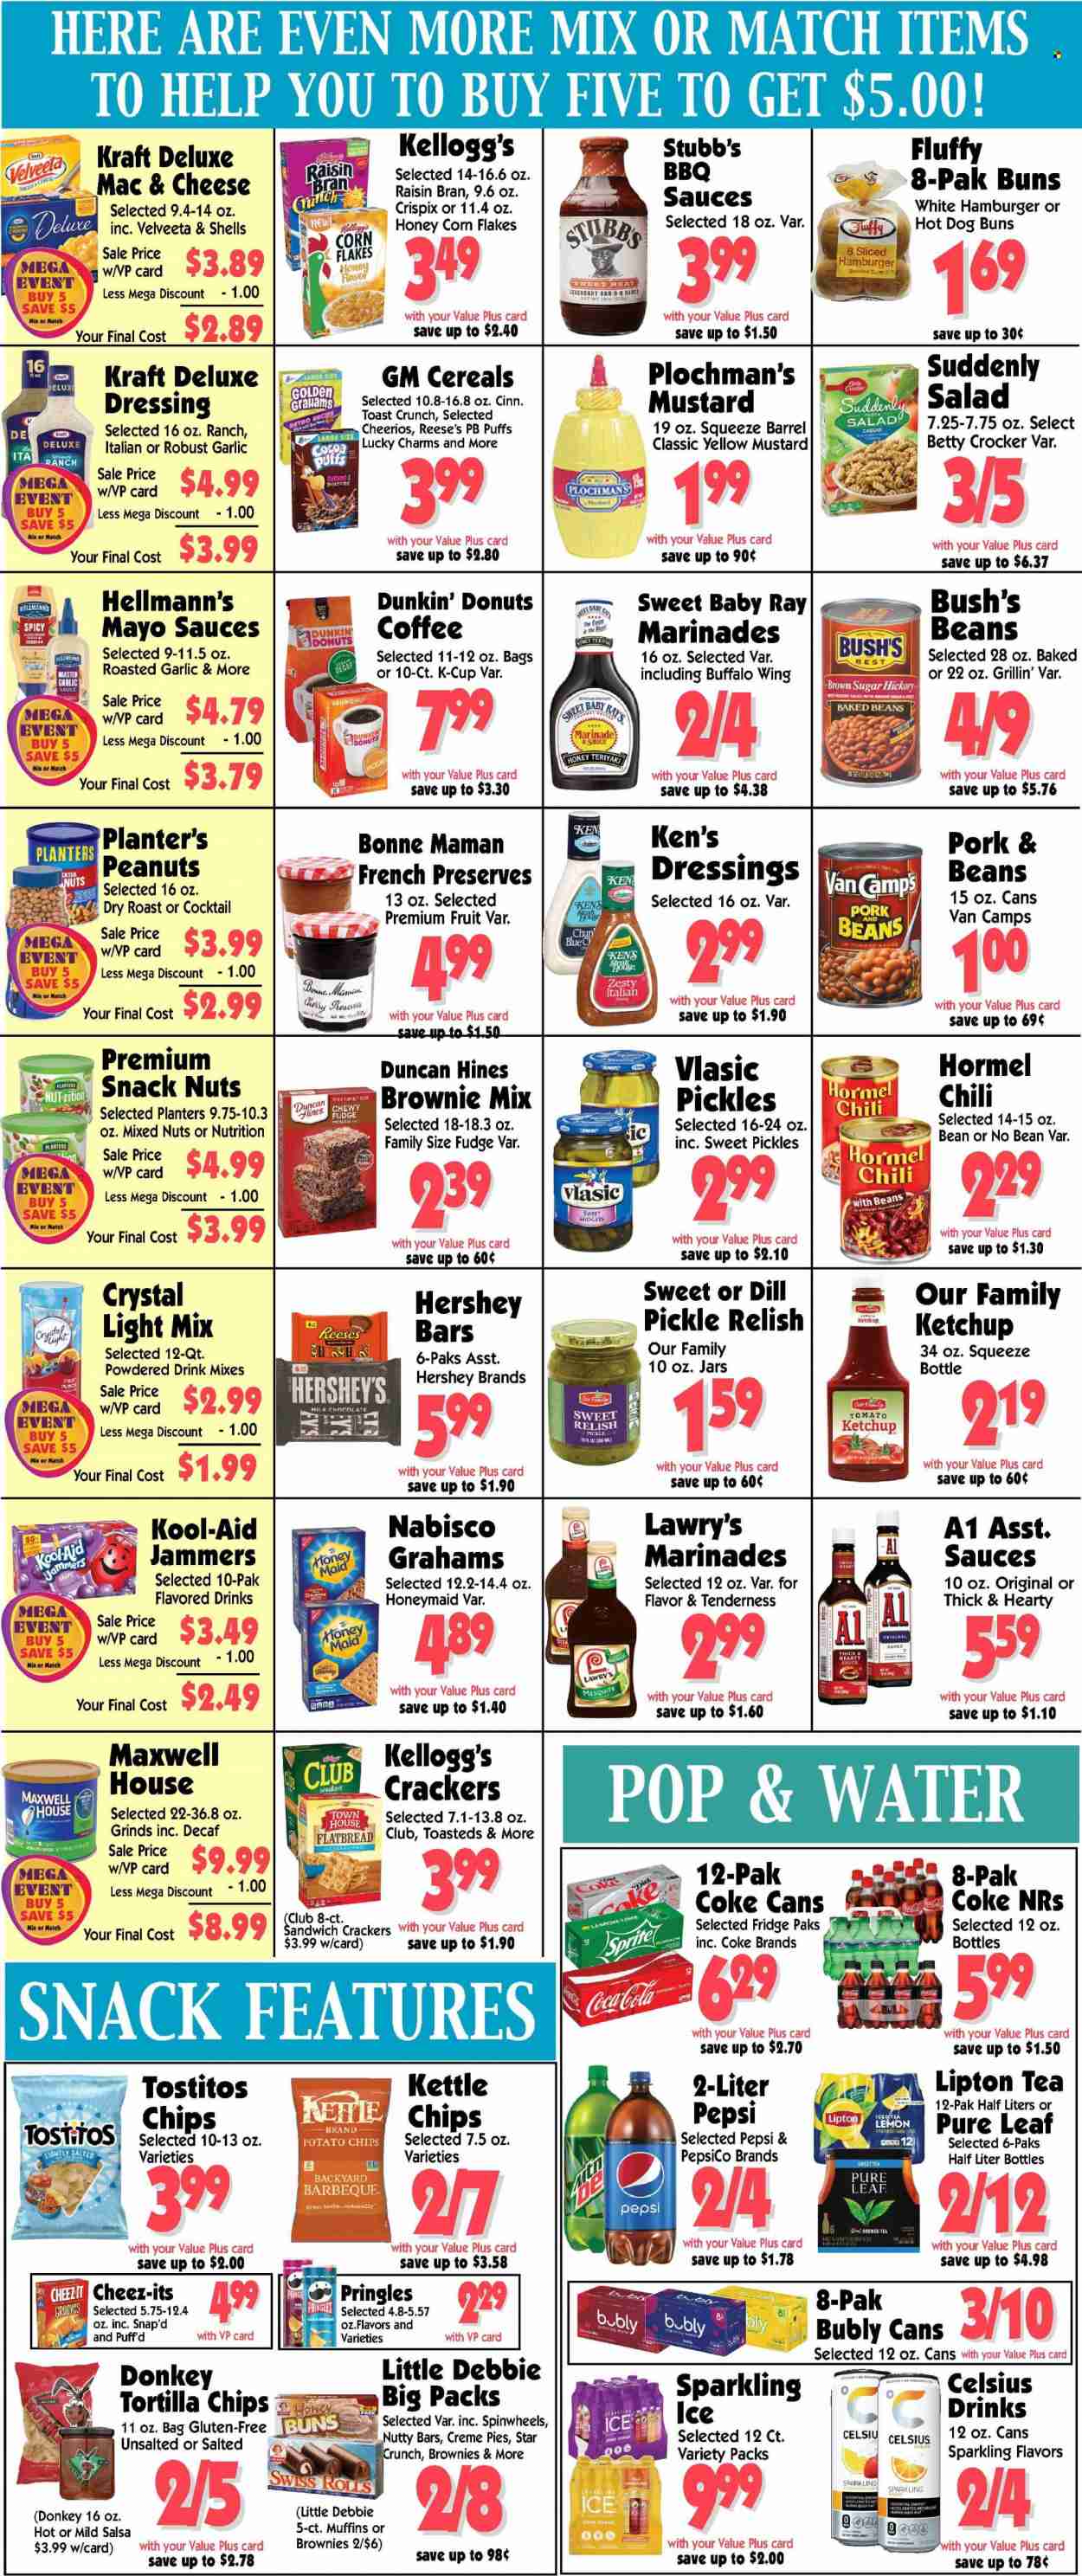 thumbnail - Al's Supermarket Flyer - 05/24/2023 - 05/30/2023 - Sales products - pita, buns, flatbread, puffs, muffin, macaroons, Dunkin' Donuts, brownie mix, cherries, Kraft®, Hormel, roast, ready meal, snack, mayonnaise, italian dressing, Hellmann’s, Reese's, Hershey's, fudge, milk chocolate, crackers, Kellogg's, Nabisco, dill pickle, tortilla chips, potato chips, Pringles, chips, Tostitos, Kettle chips, salty snack, cane sugar, pickles, baked beans, cereals, Cheerios, corn flakes, Raisin Bran, Honey Maid, dill, mustard, ketchup, dressing, salsa, marinade, garlic sauce, peanuts, mixed nuts, Planters, Coca-Cola, Sprite, Pepsi, Lipton, ice tea, soft drink, Coke, flavored water, water, powder drink, Maxwell House, Pure Leaf, coffee, coffee capsules, K-Cups, steak, jar. Page 4.